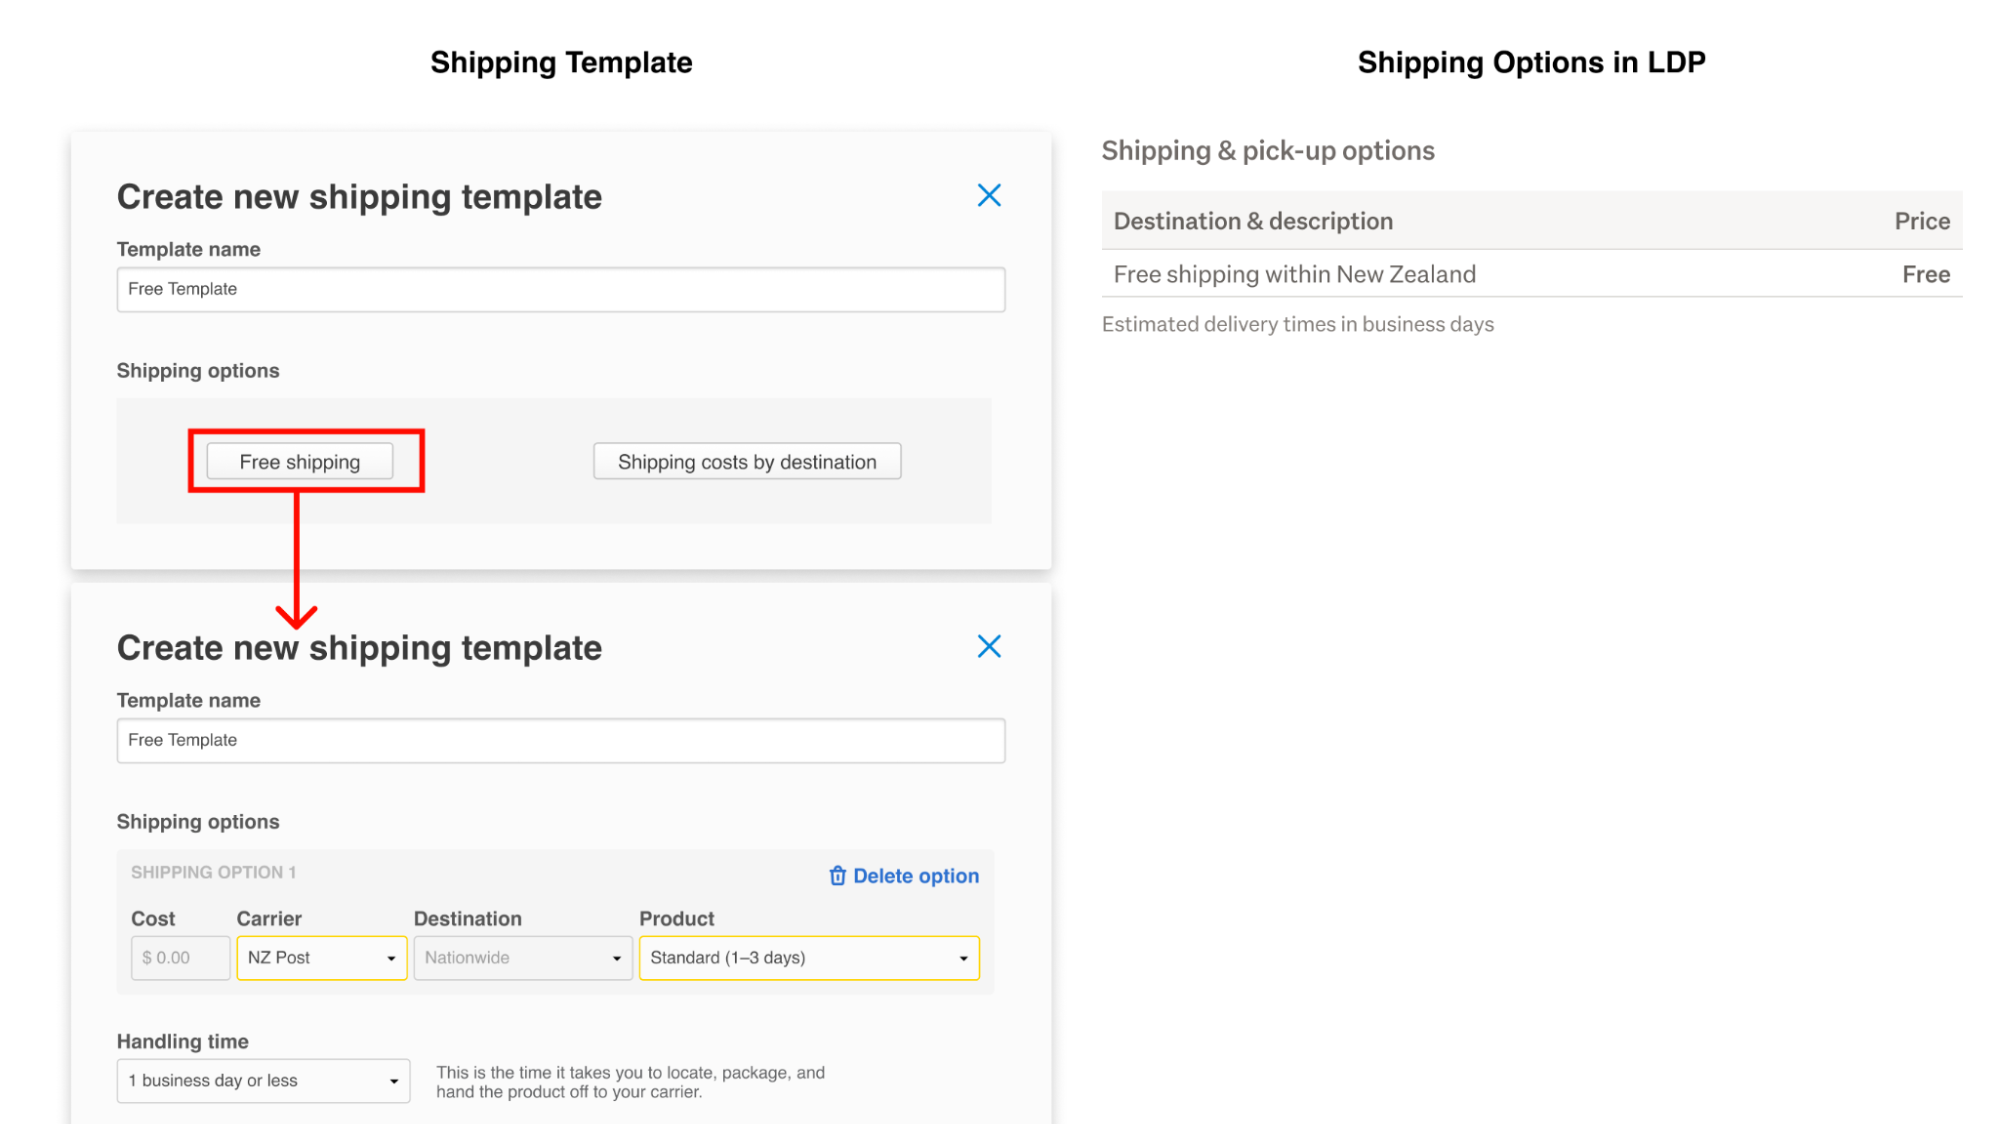 How a free shipping template will appear to buyers